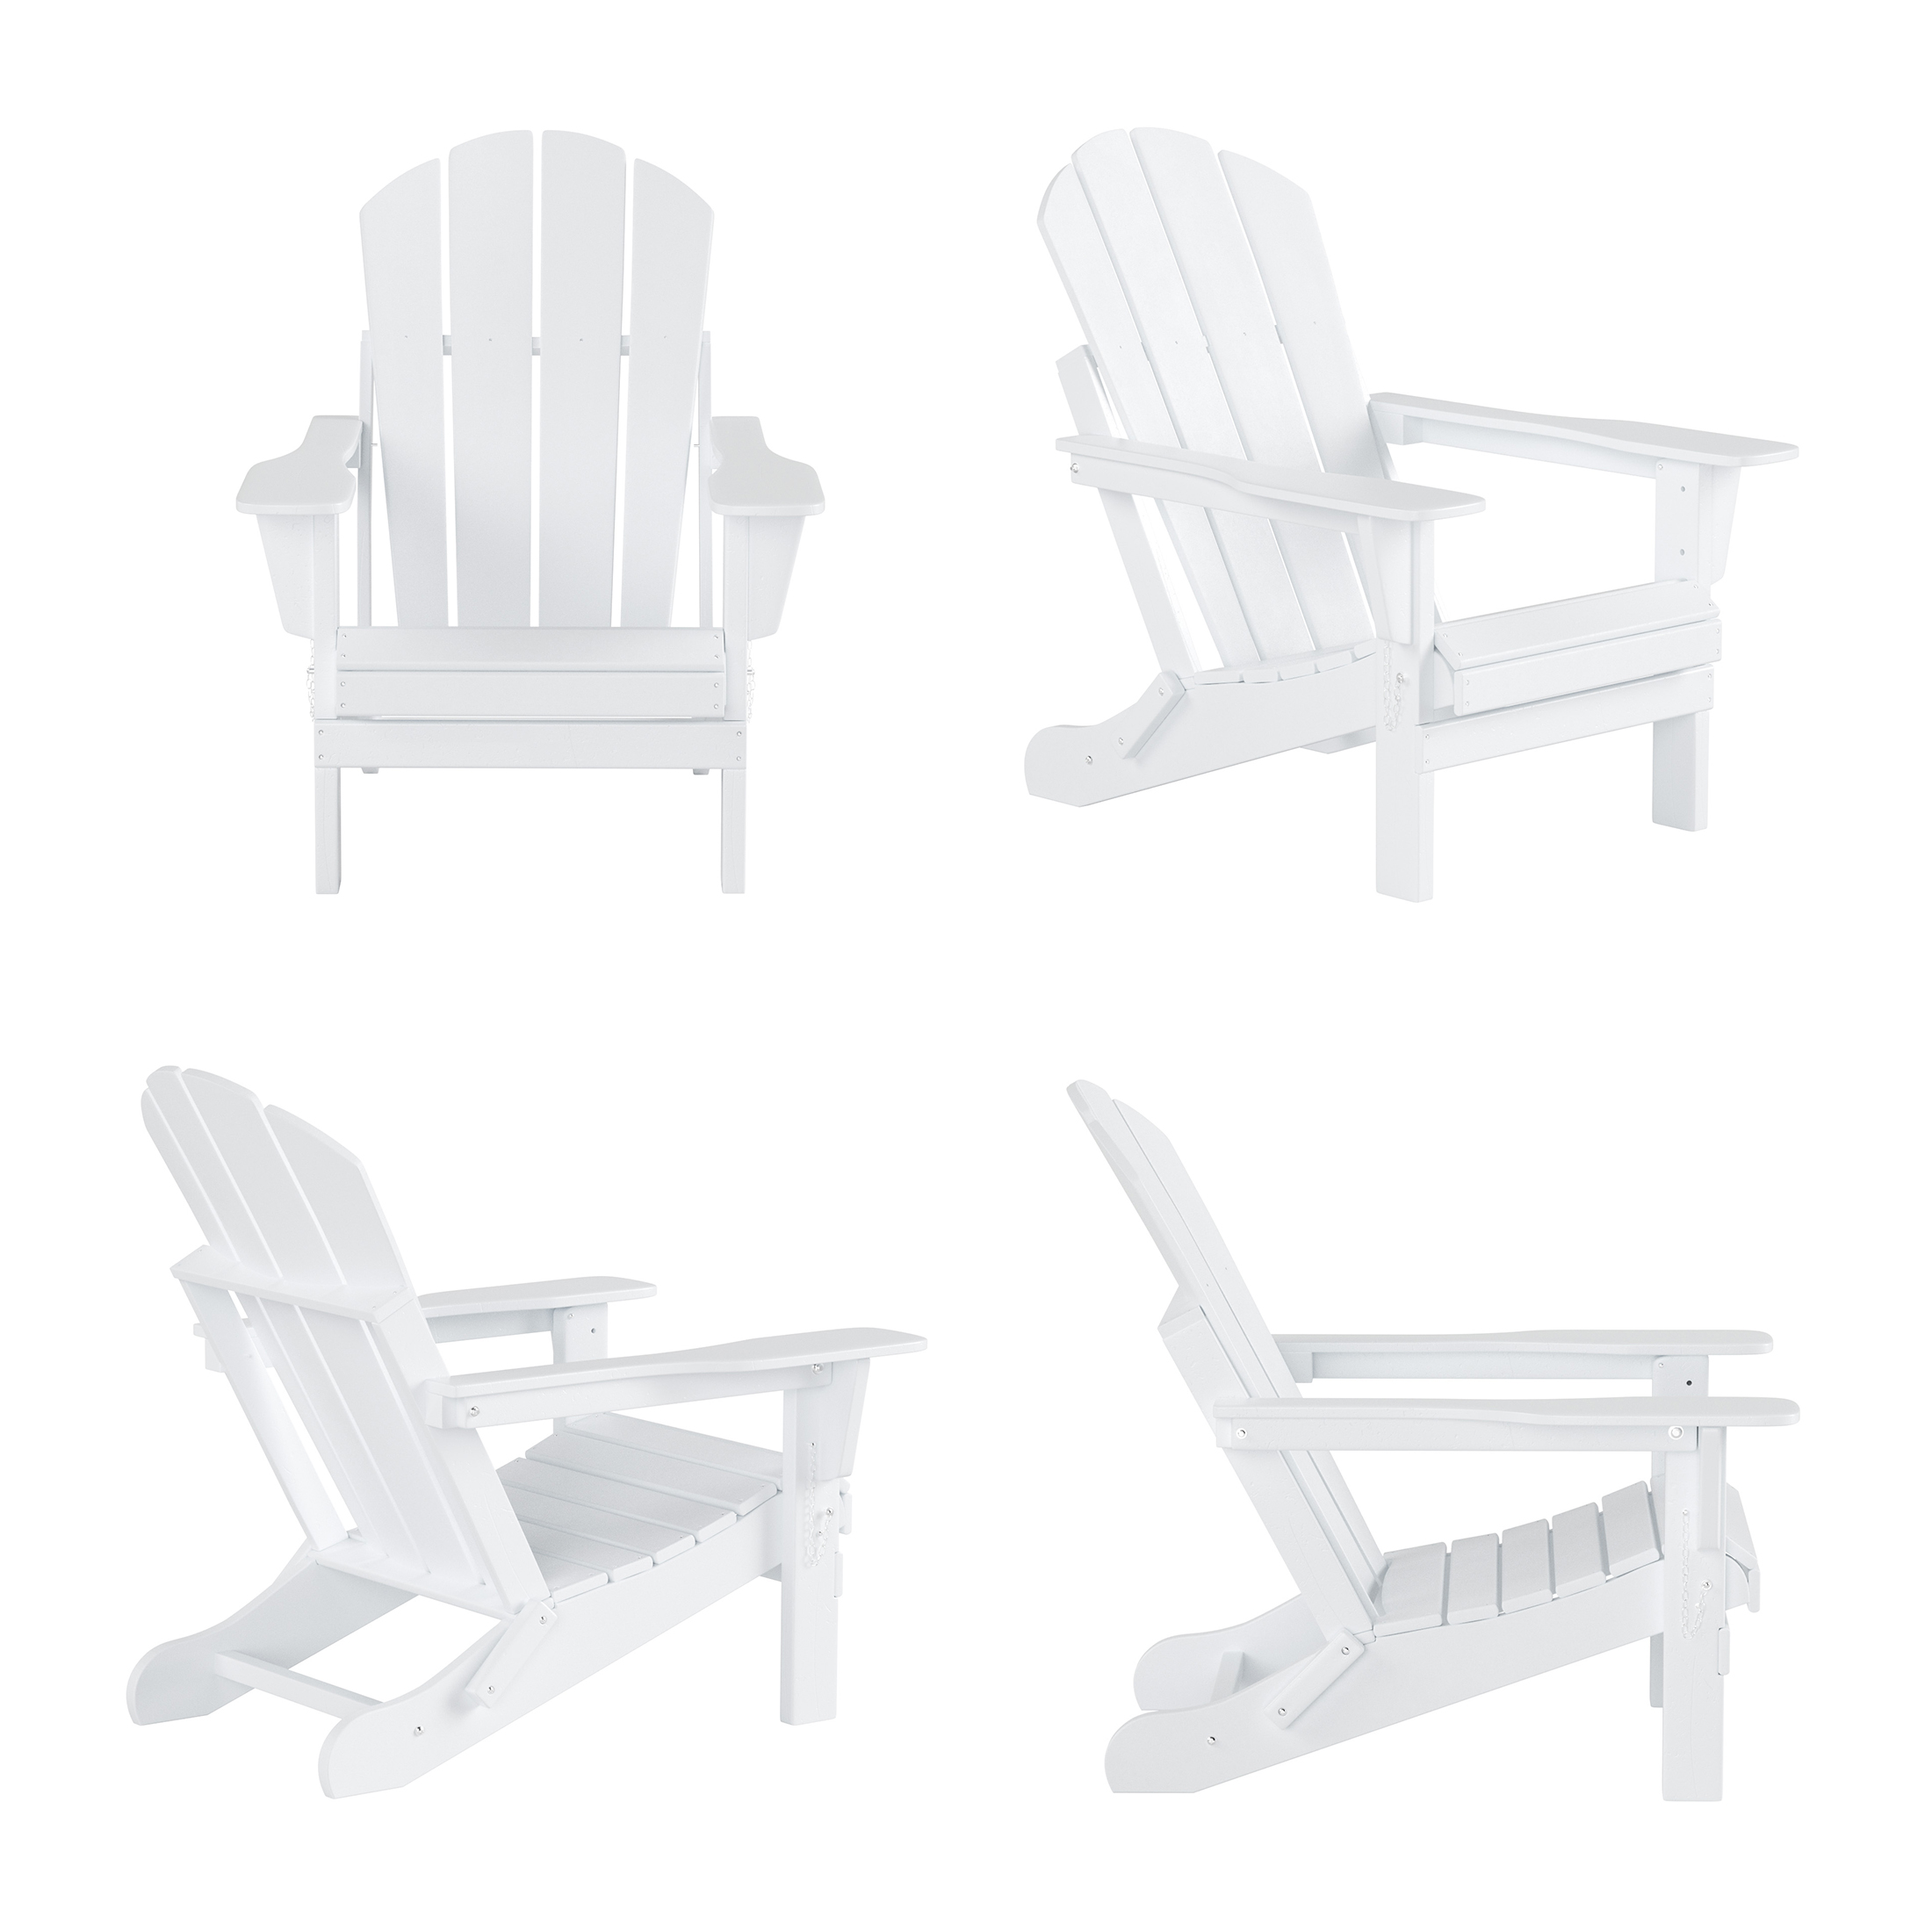 WestinTrends Malibu Outdoor Lounge Chair, 2-Pieces Adirondack Chair Set with Ottoman, All Weather Poly Lumber Patio Lawn Folding Chairs for Outside Pool Garden Backyard Beach, White - image 4 of 6